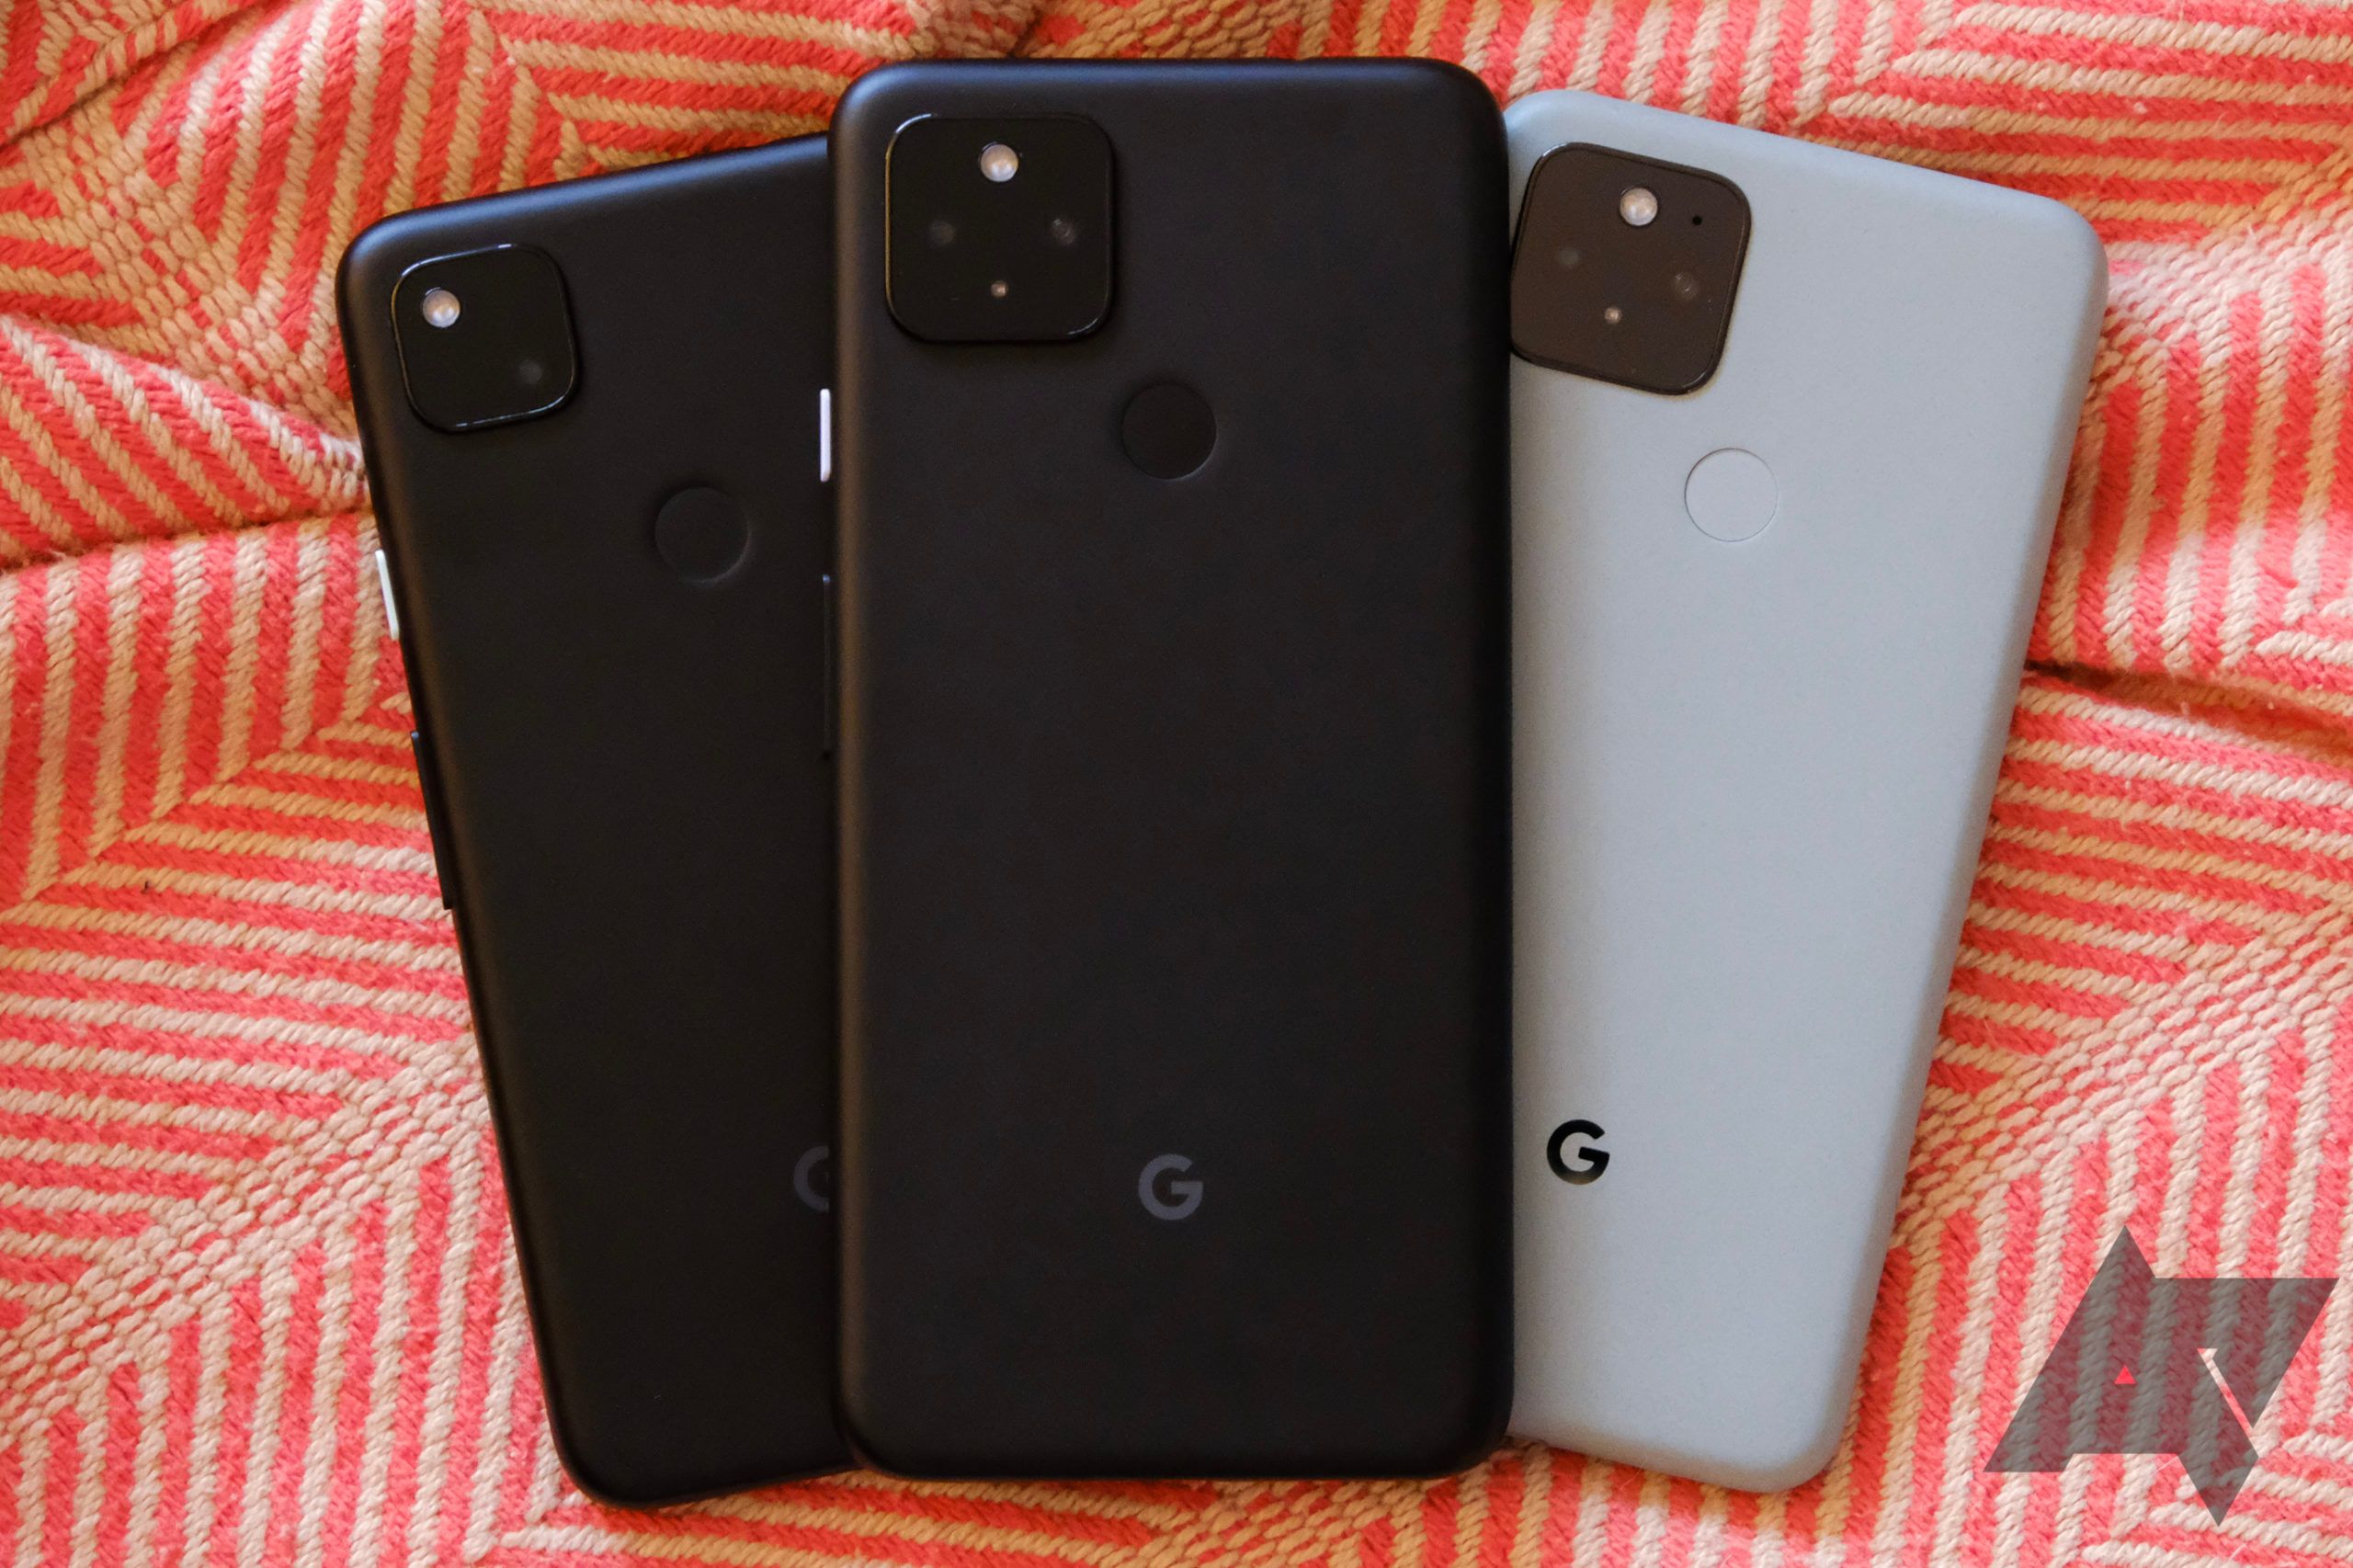 A wild Pixel 5 and Pixel 4a (5G) update appears